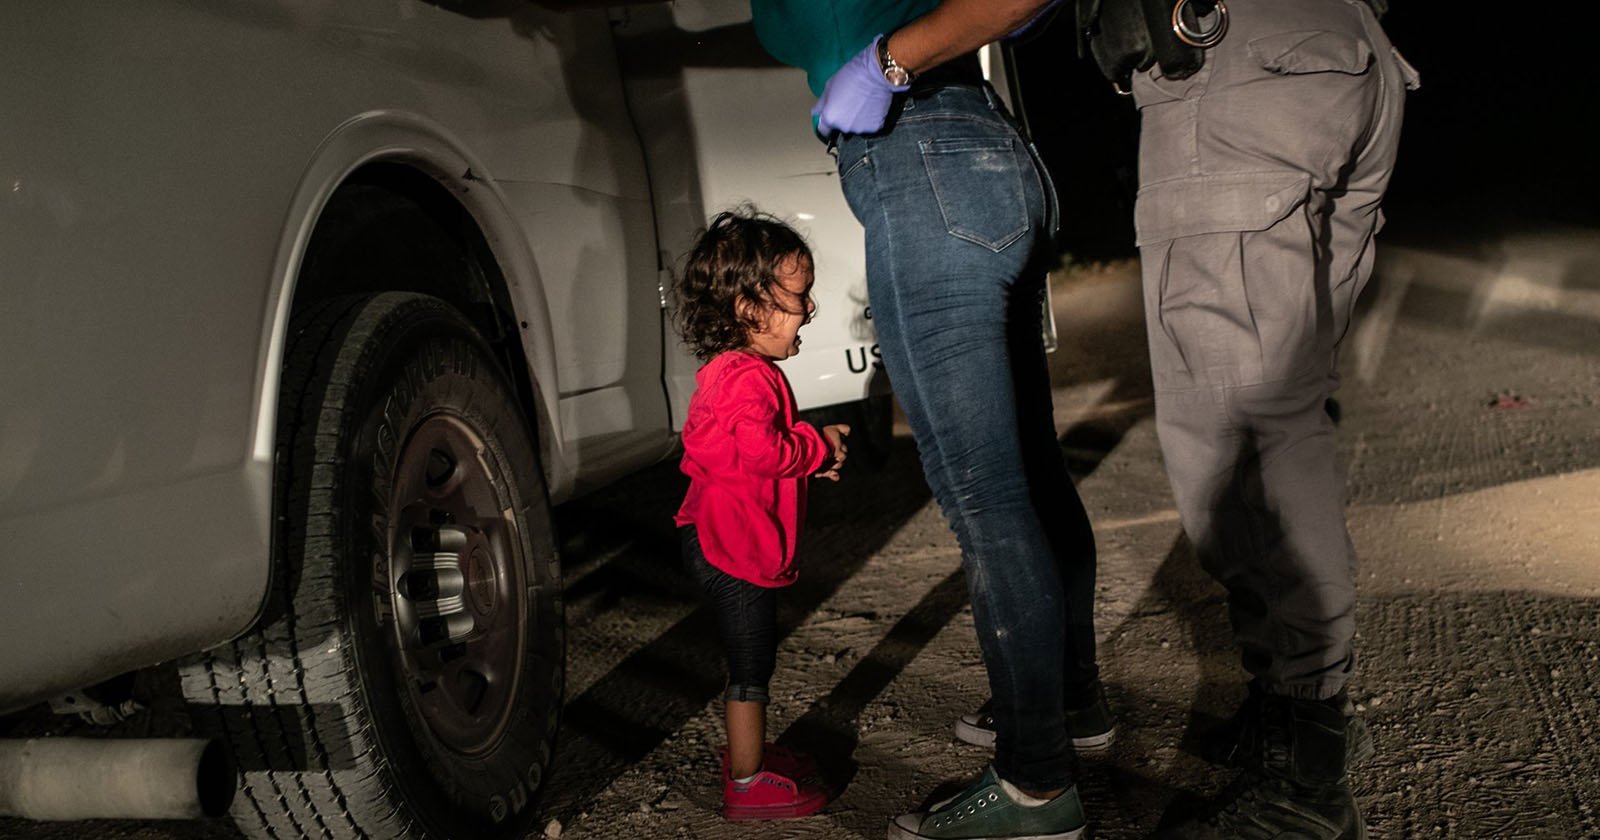 Photo of ‘Crying Girl on the Border’ Wins World Press Photo 2019